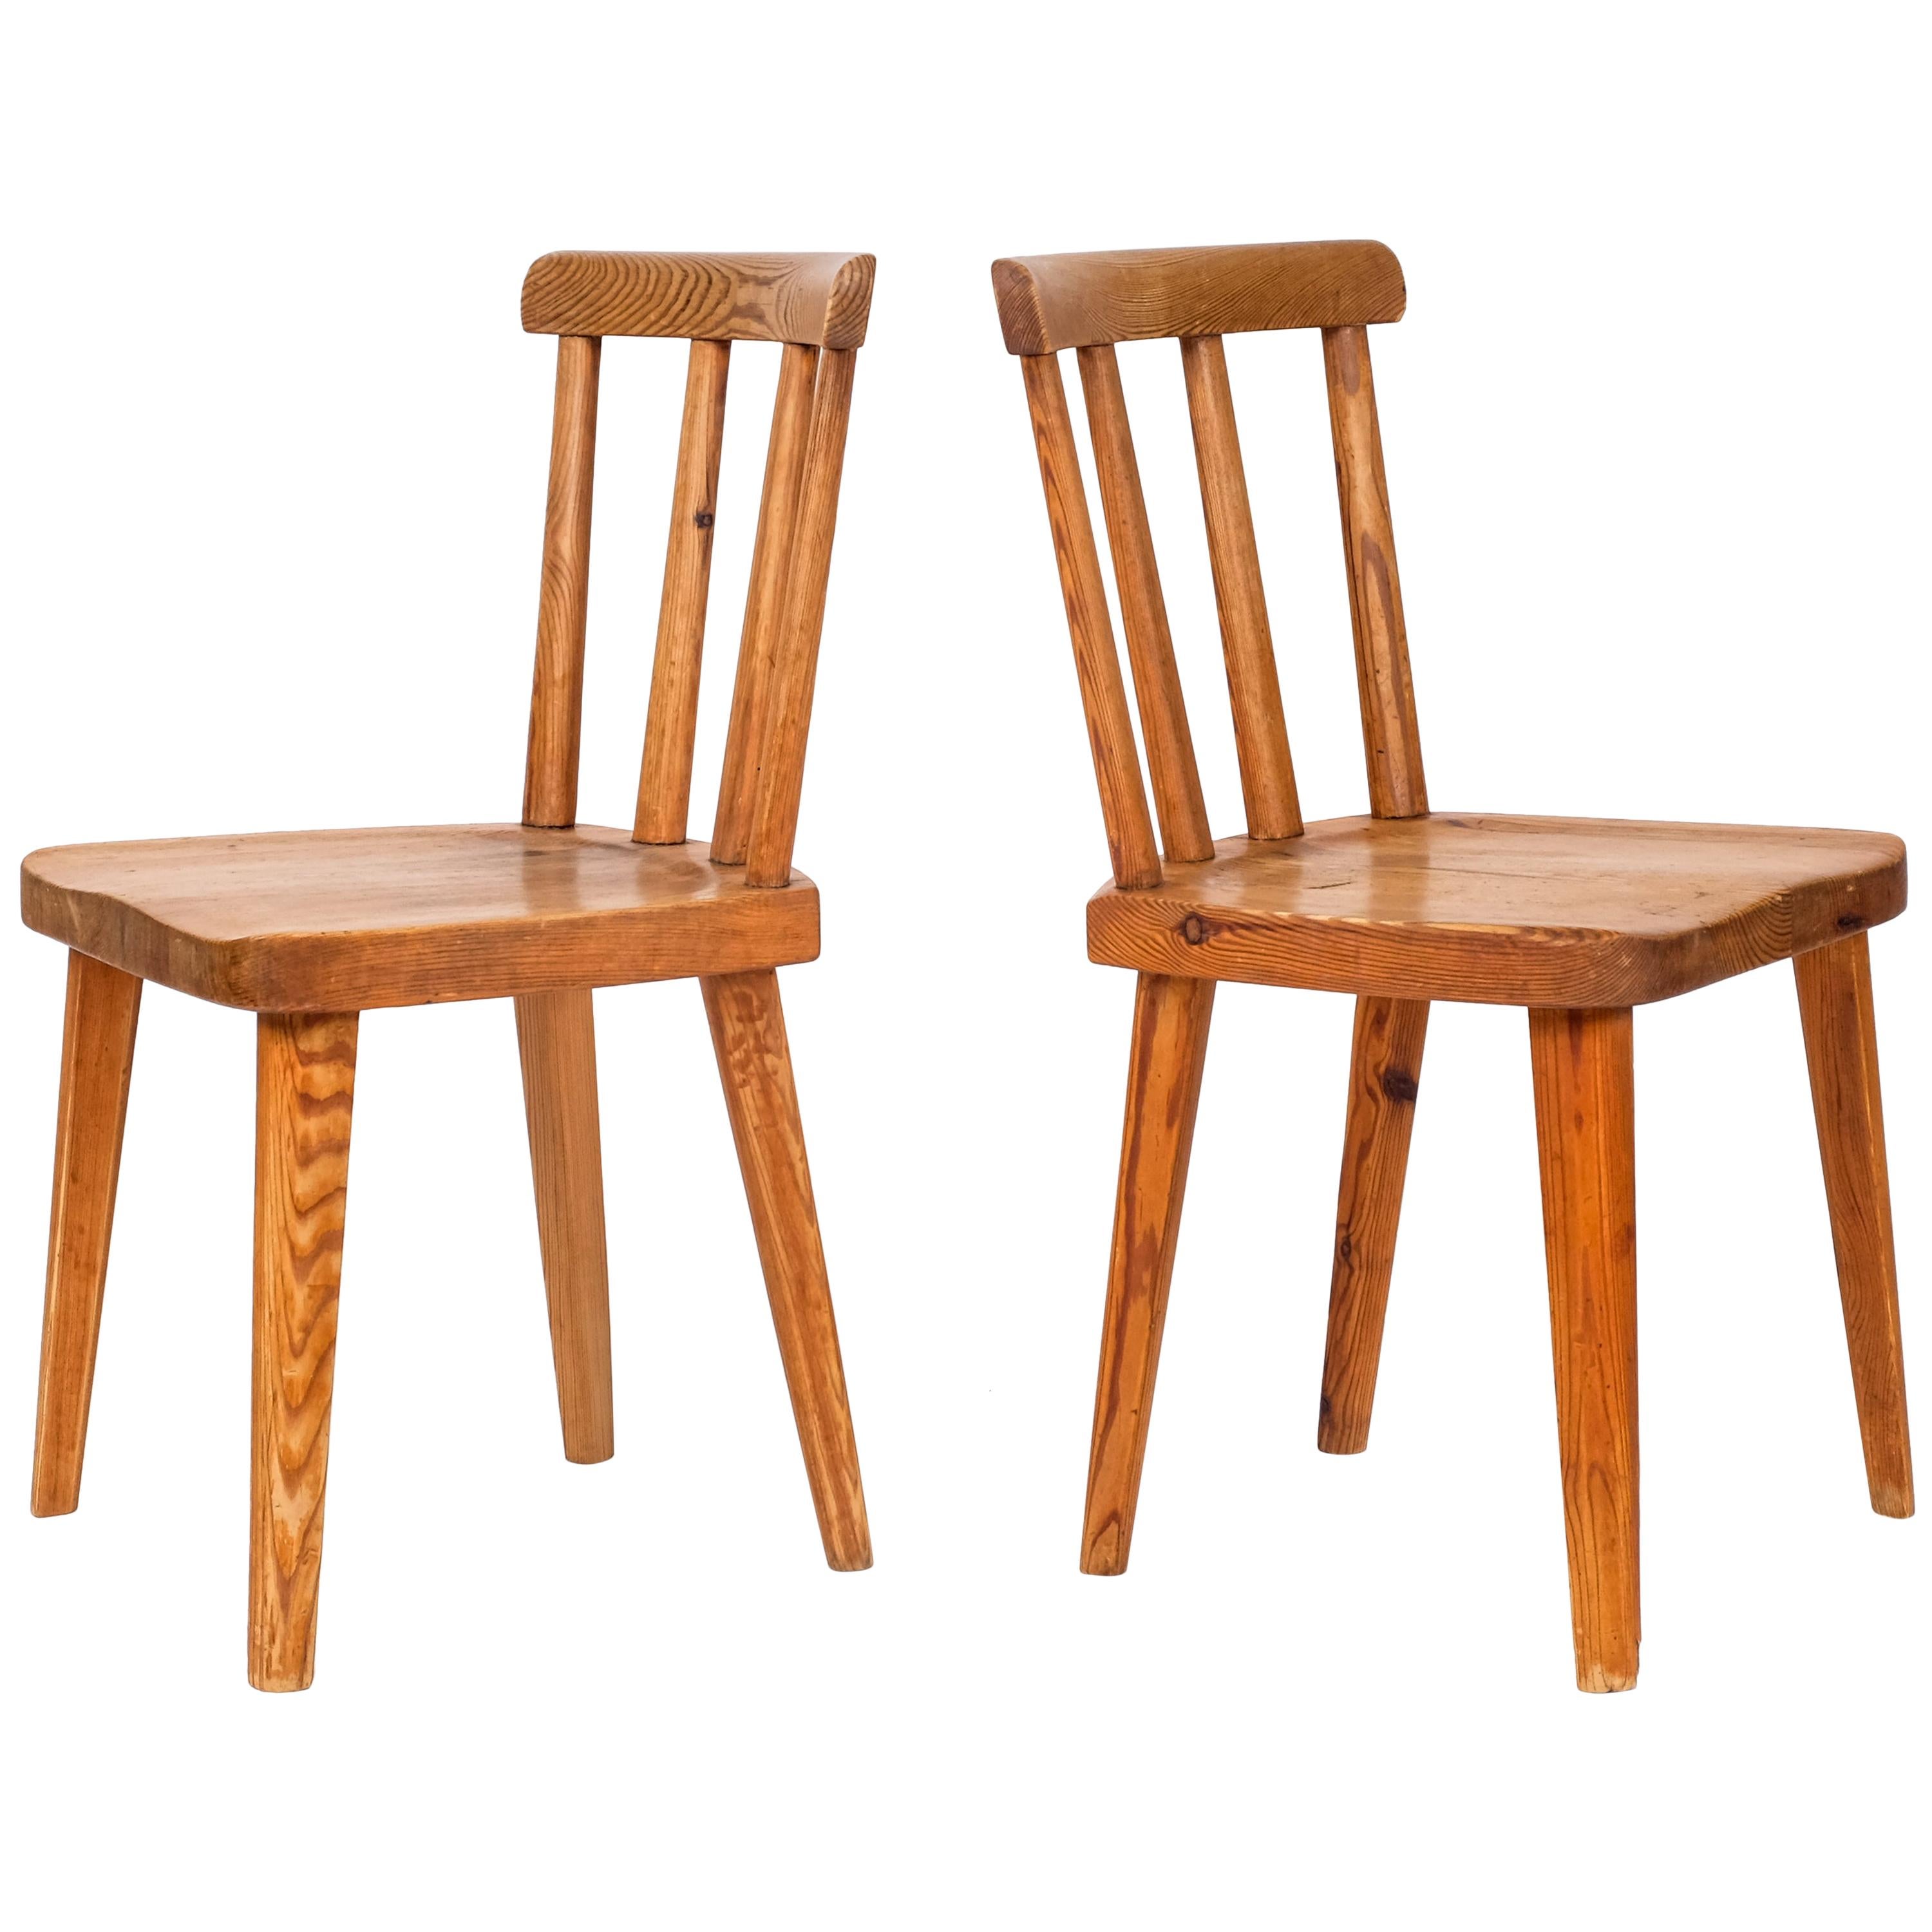 Pair of "Utö" Chairs by Axel-Einar Hjorth, 1930s For Sale